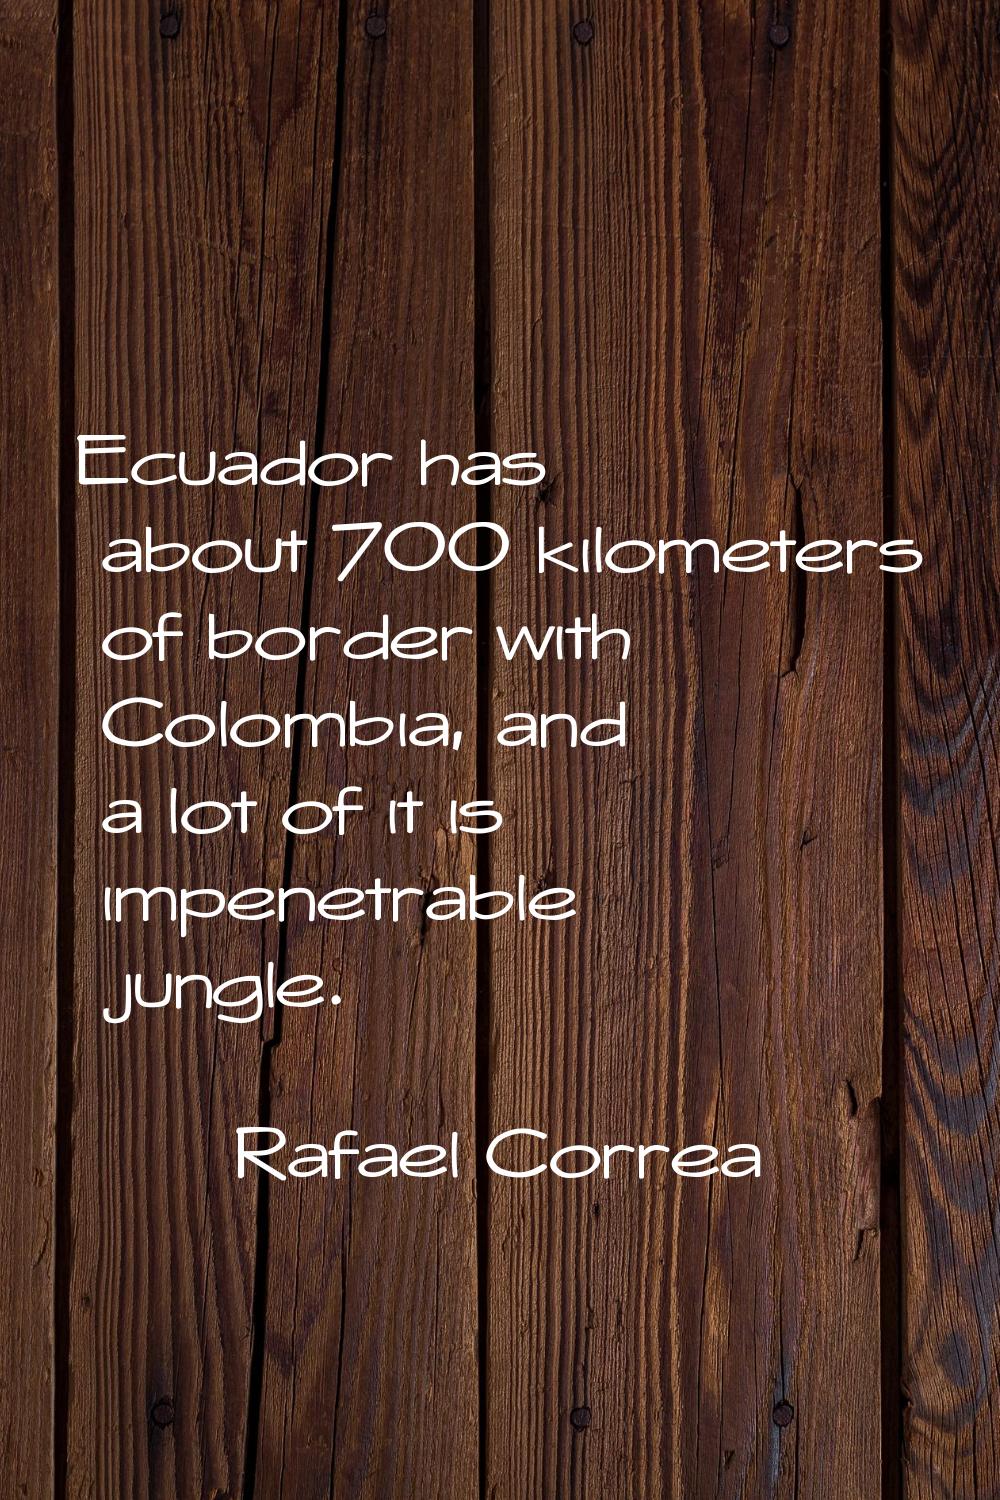 Ecuador has about 700 kilometers of border with Colombia, and a lot of it is impenetrable jungle.